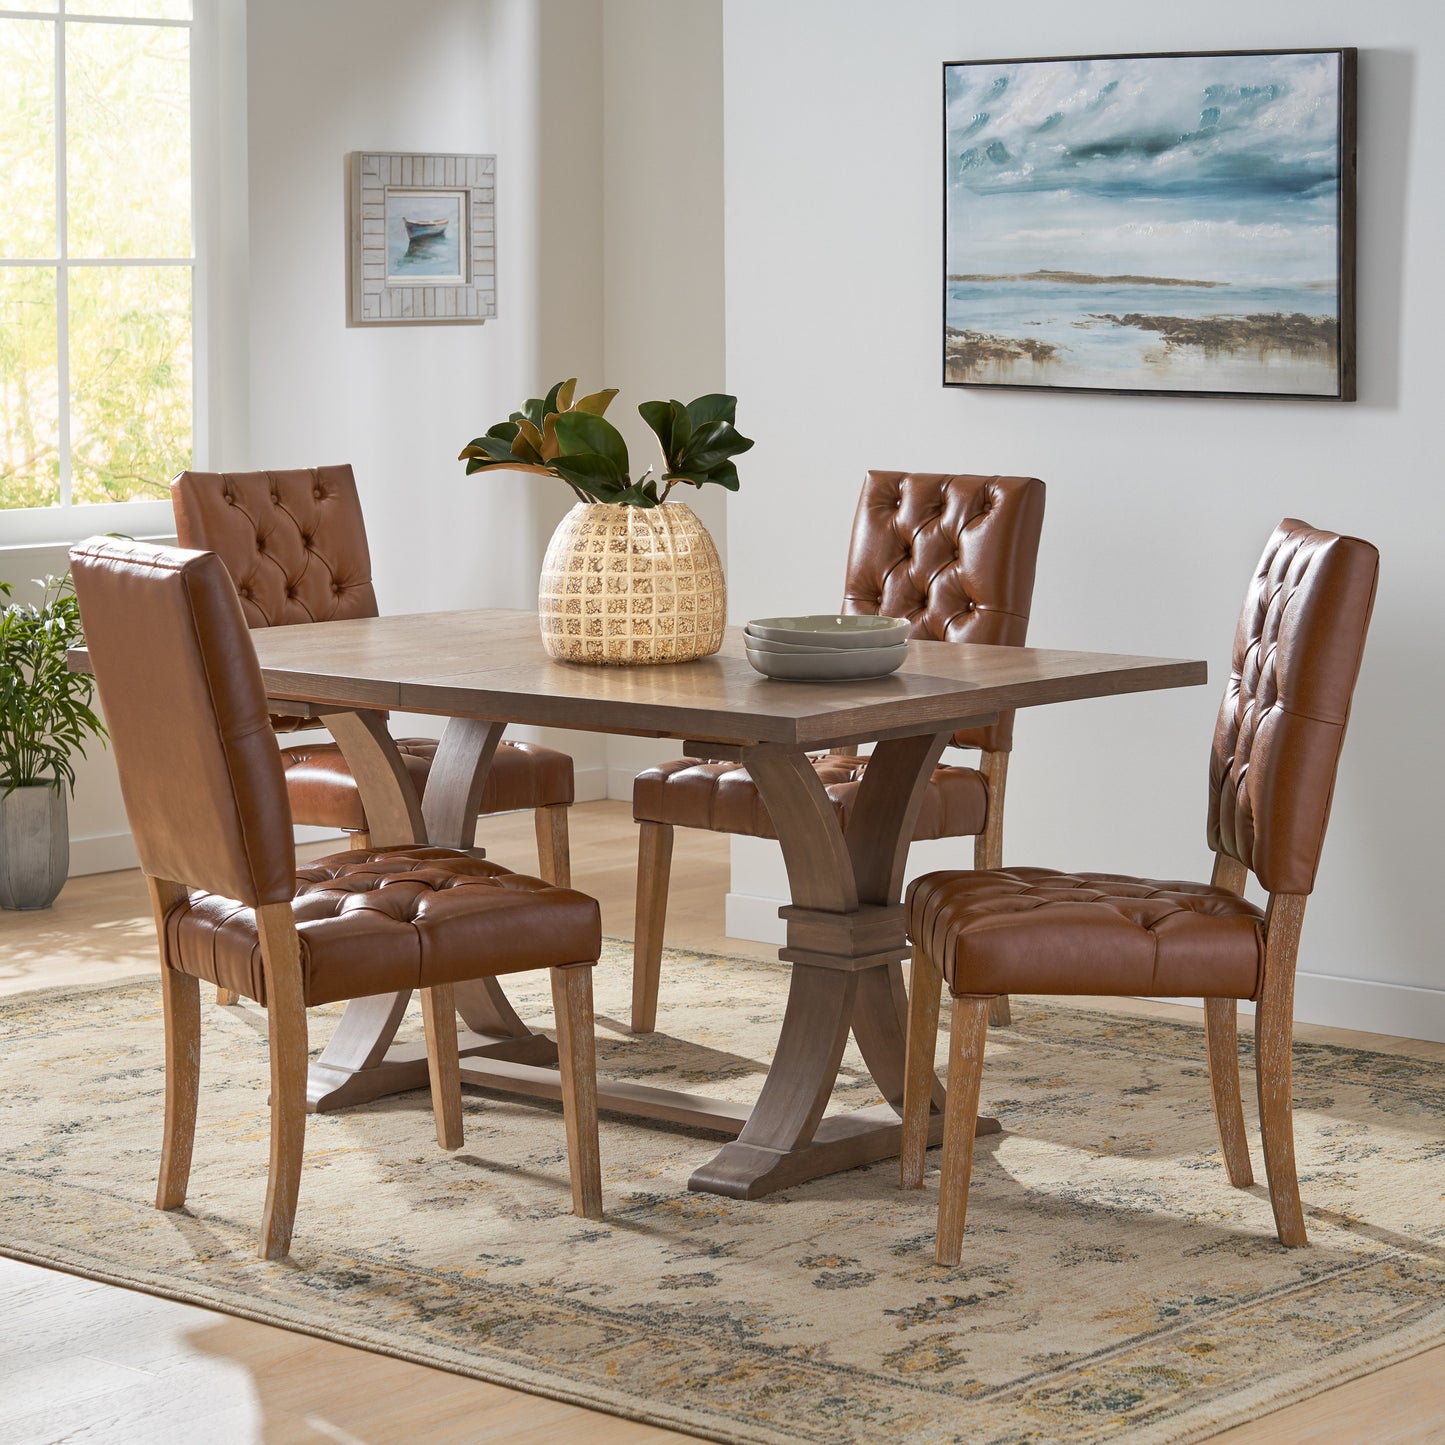 Welby Contemporary Tufted Dining Chairs, Set of 4